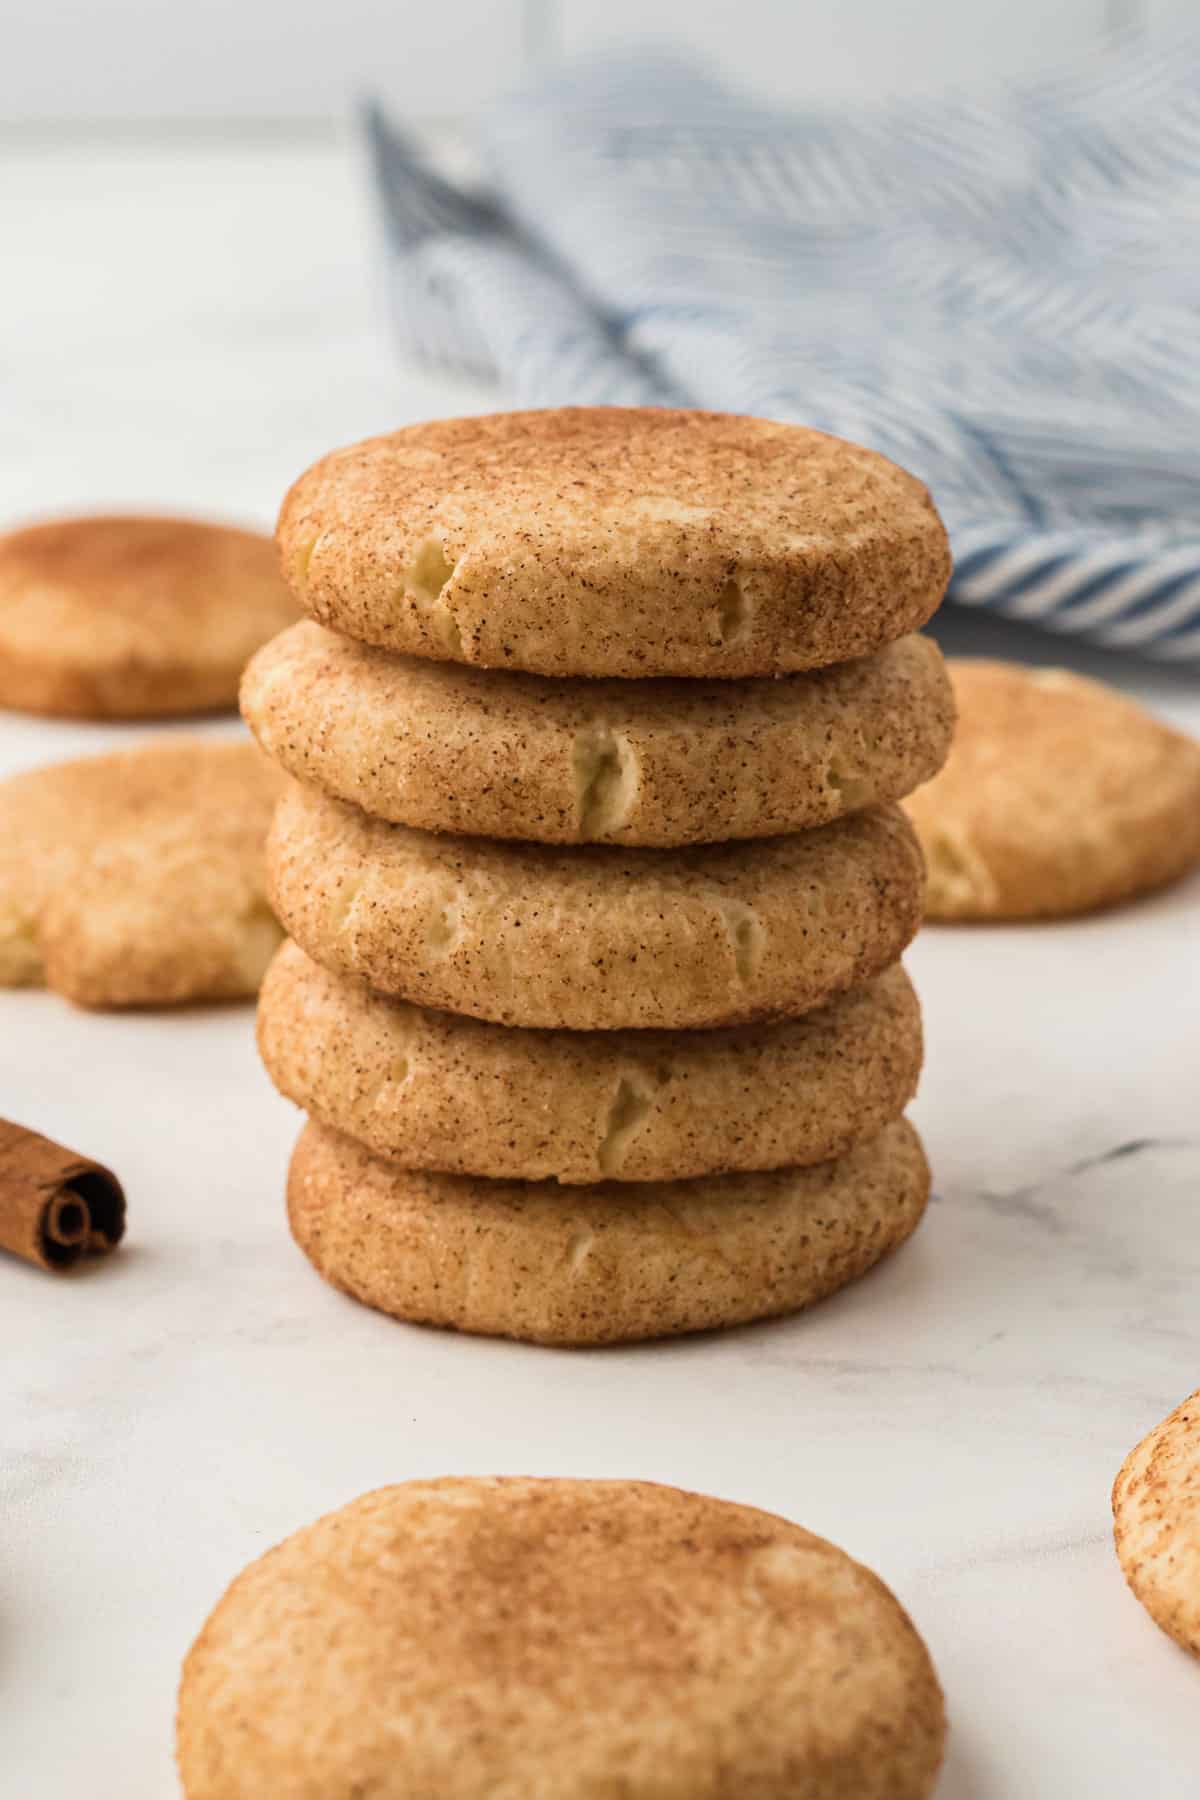 A pile of Snickerdoodles on a counter